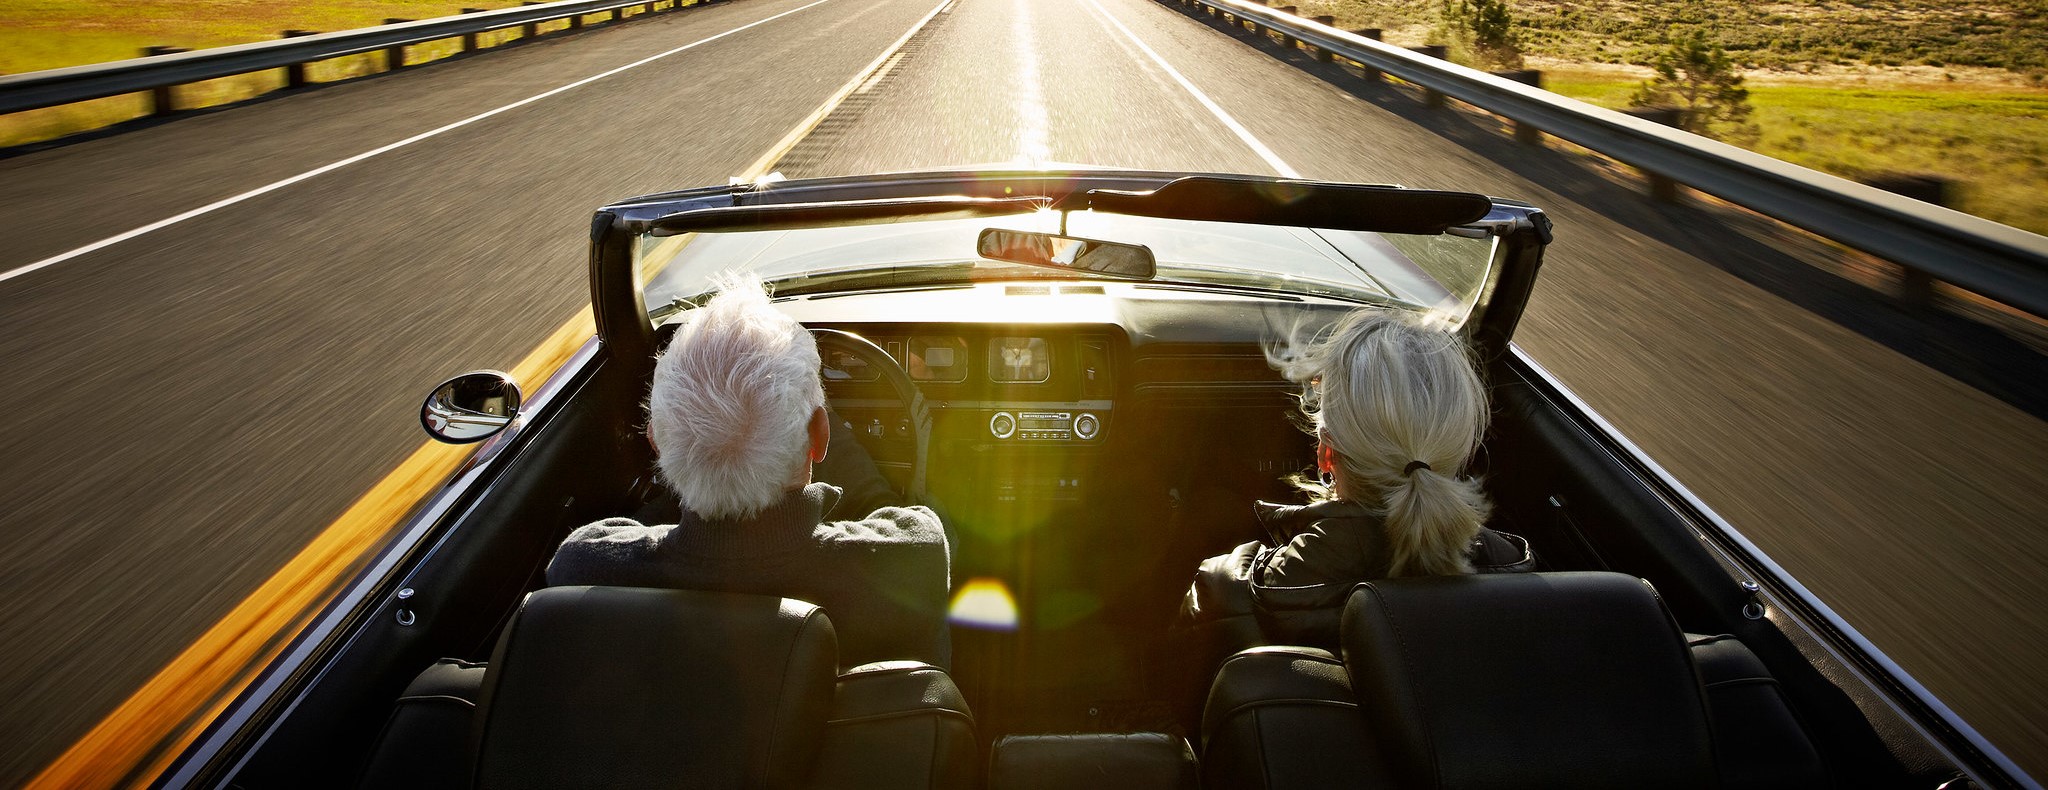 Are You Ever Too Old to Buy Your Dream Car? | Boca Raton, FL